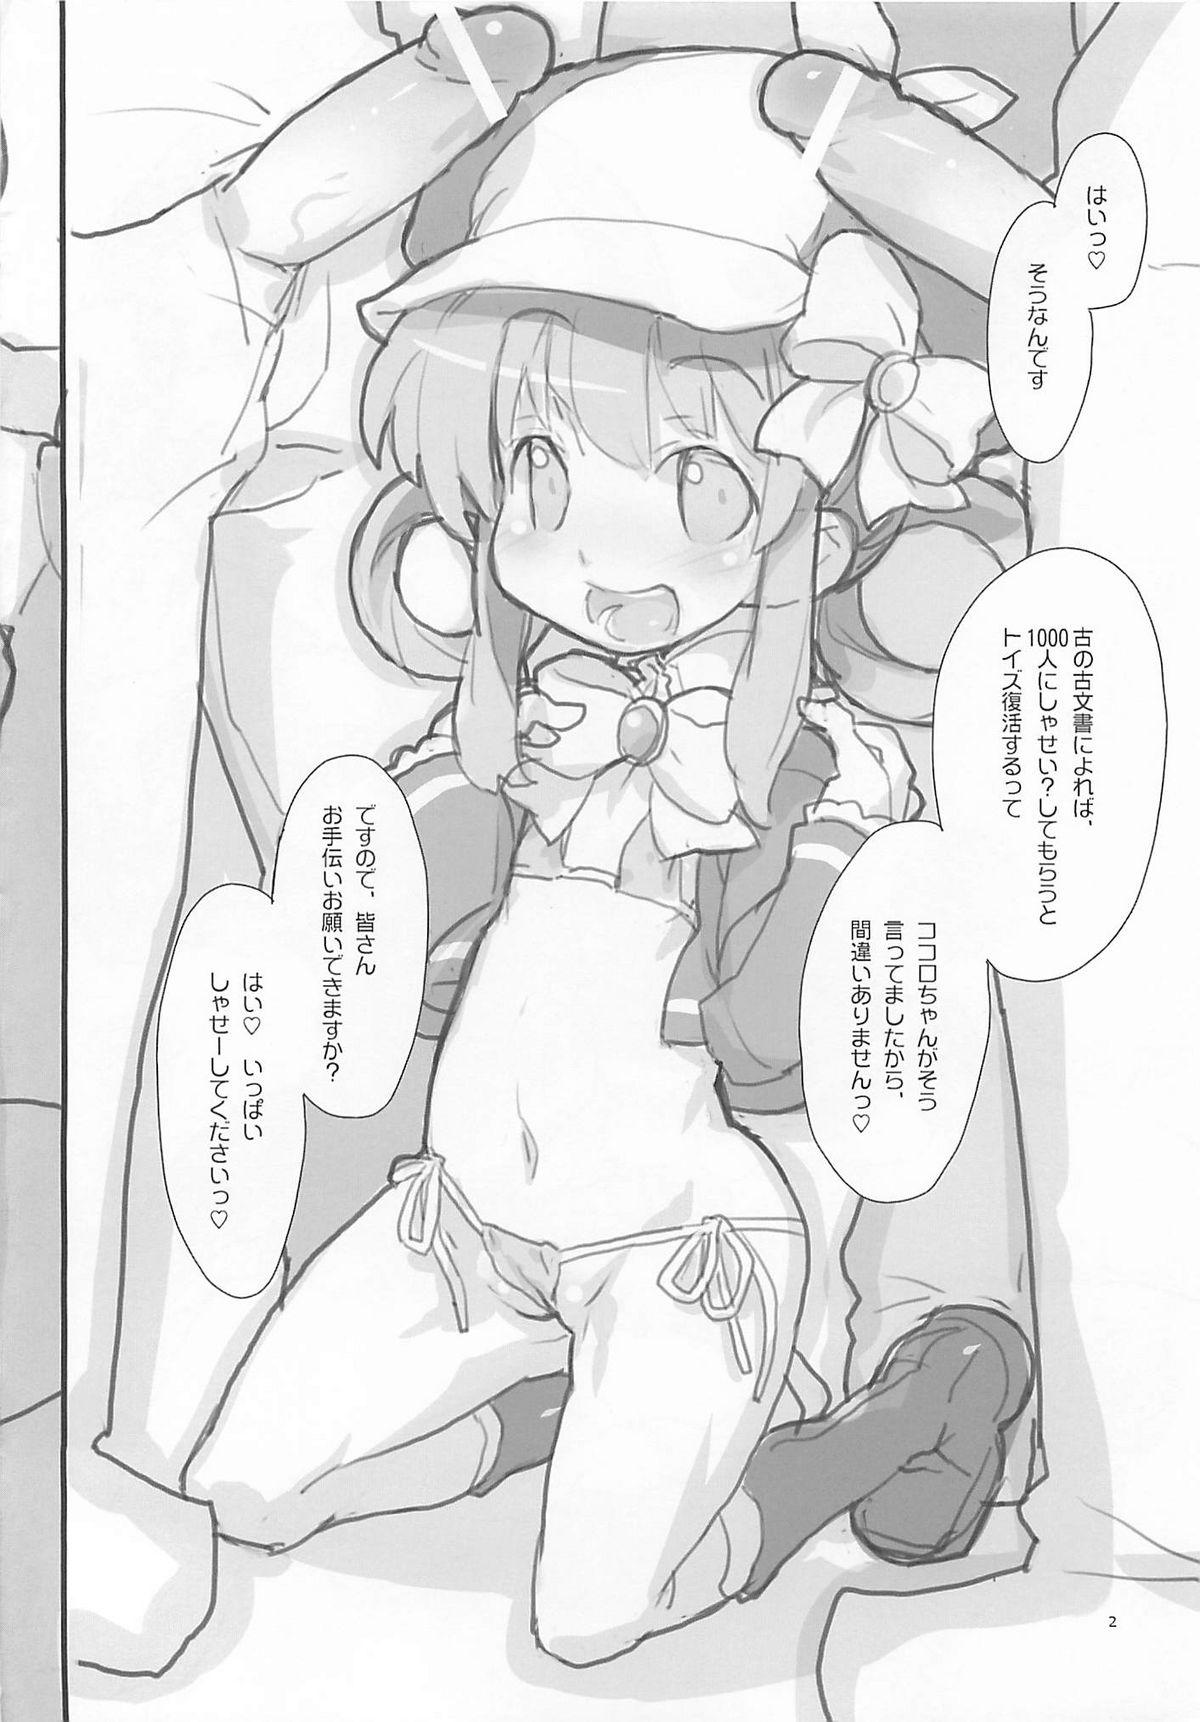 Naturaltits milky holes - Tantei opera milky holmes Private - Page 3